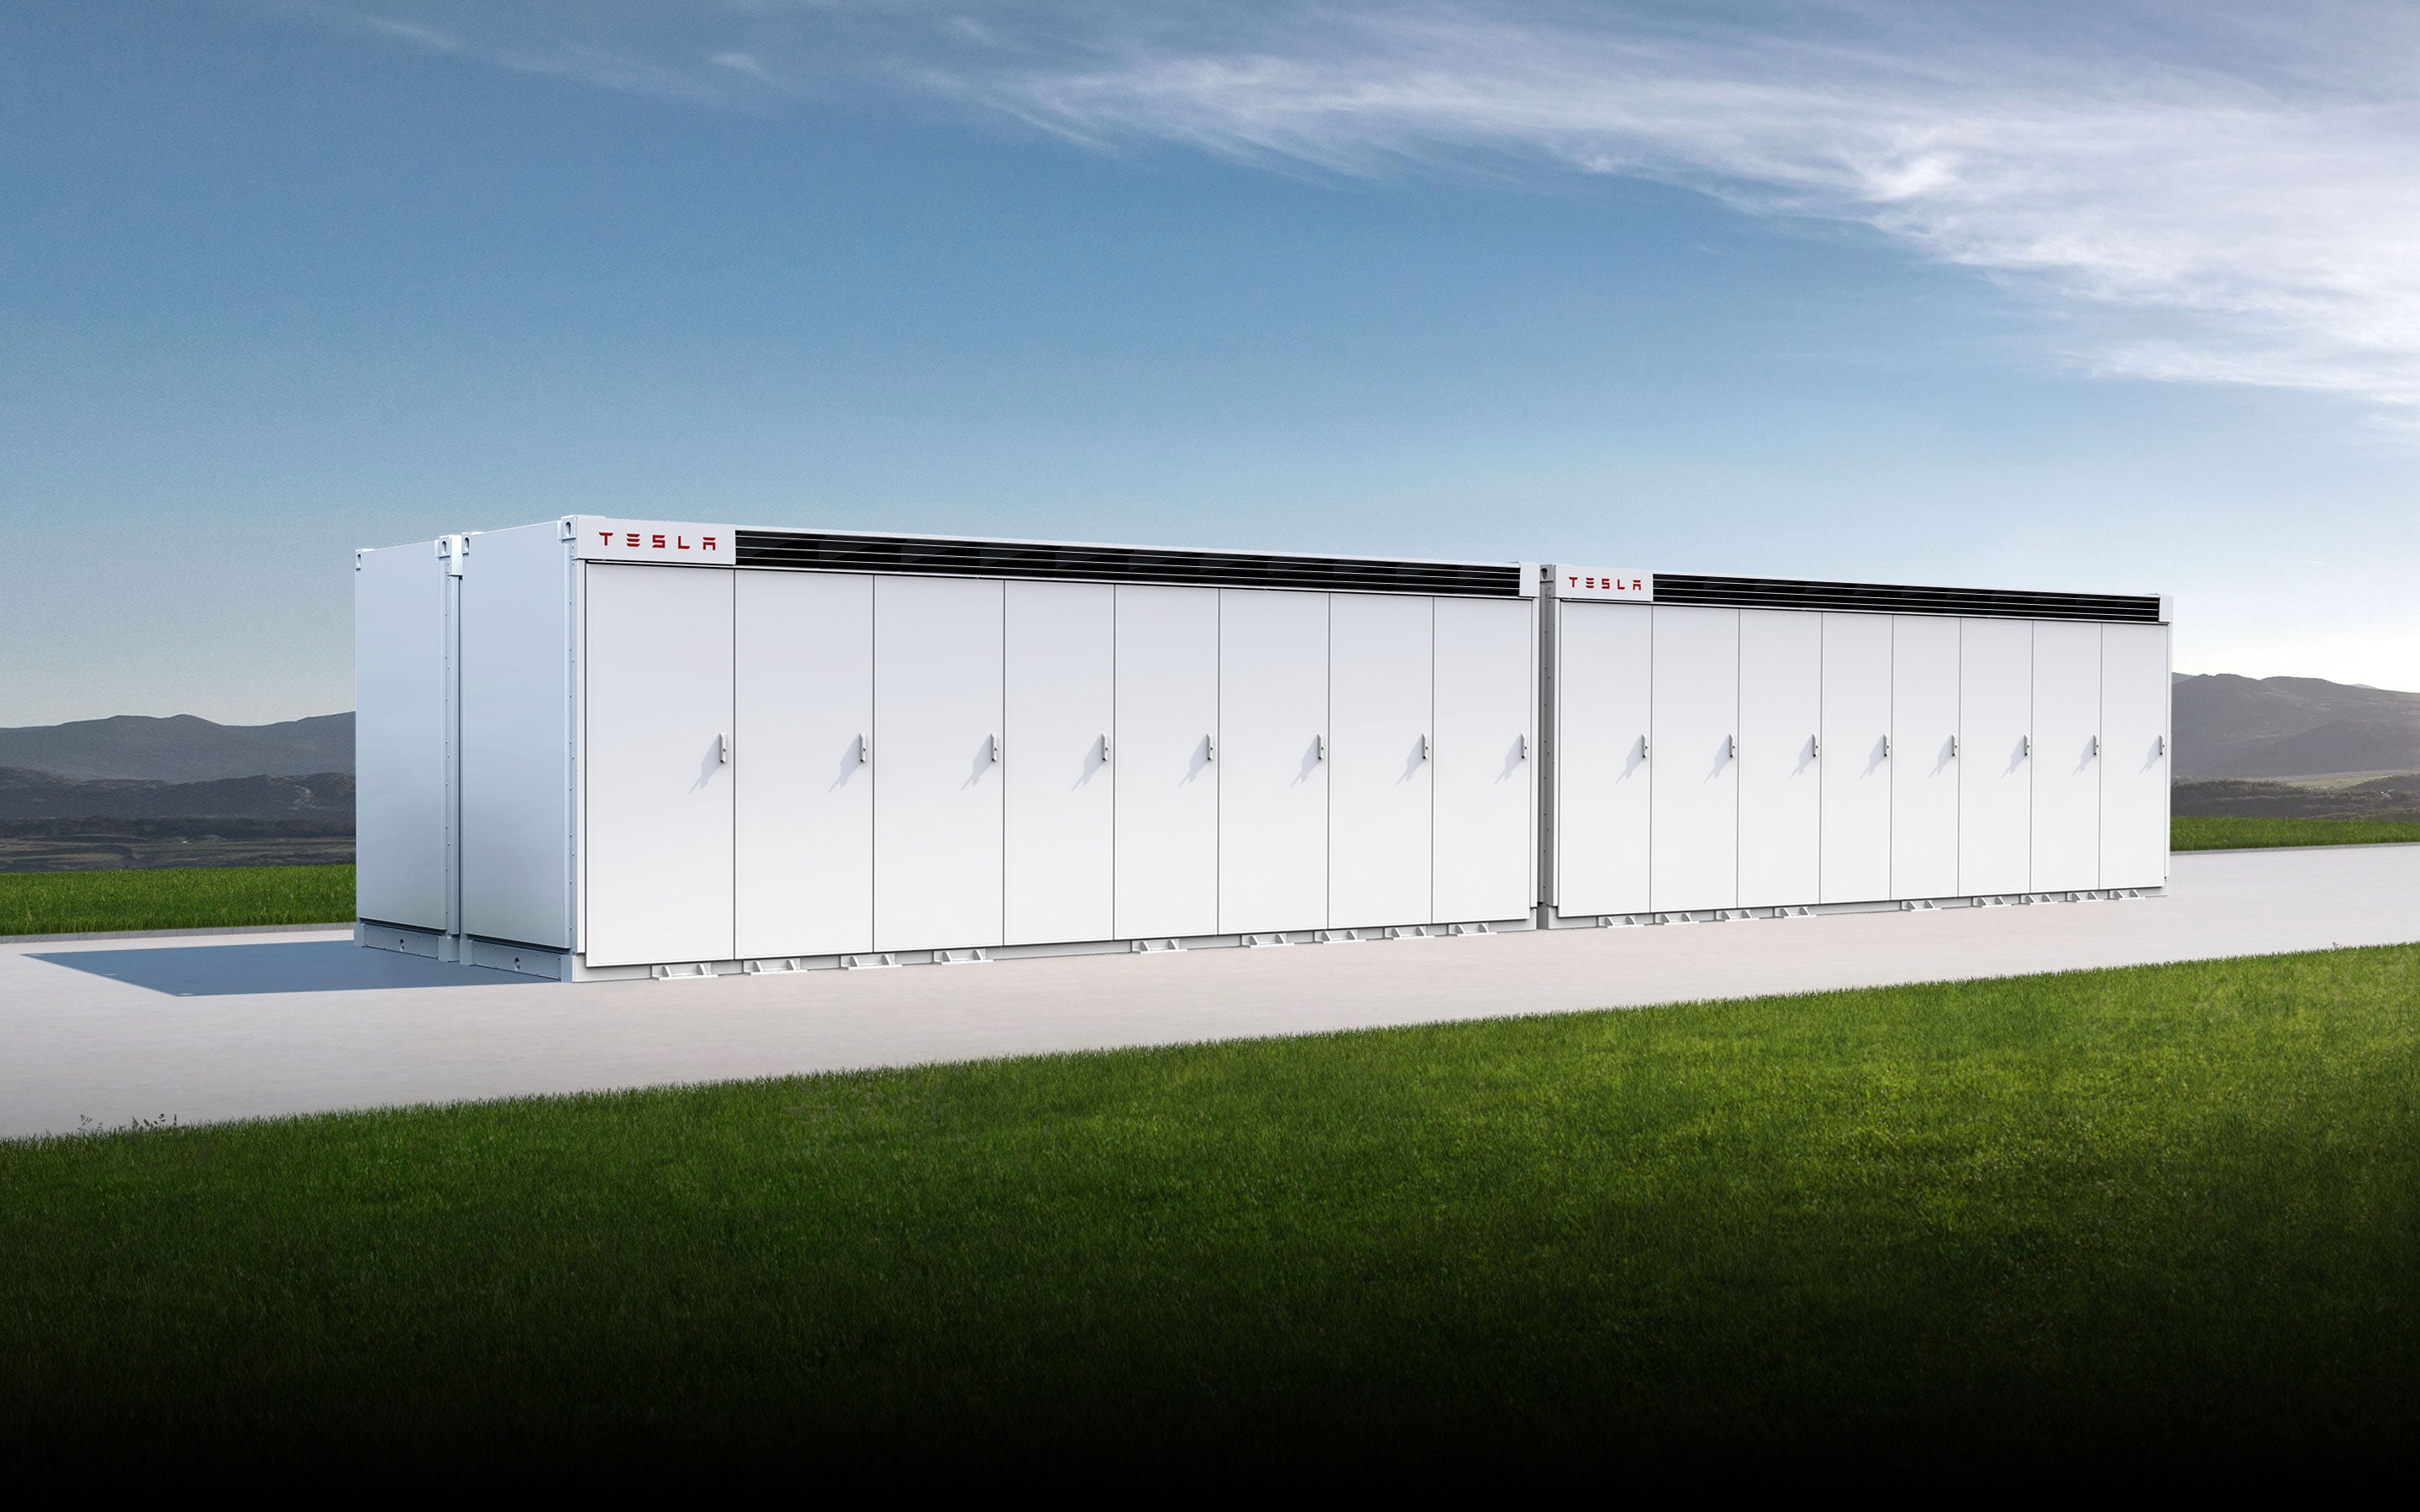 Tesla Big-Battery Leads Clean Energy Revolution as California Targets 100% CO2-Free Electricity by 2035